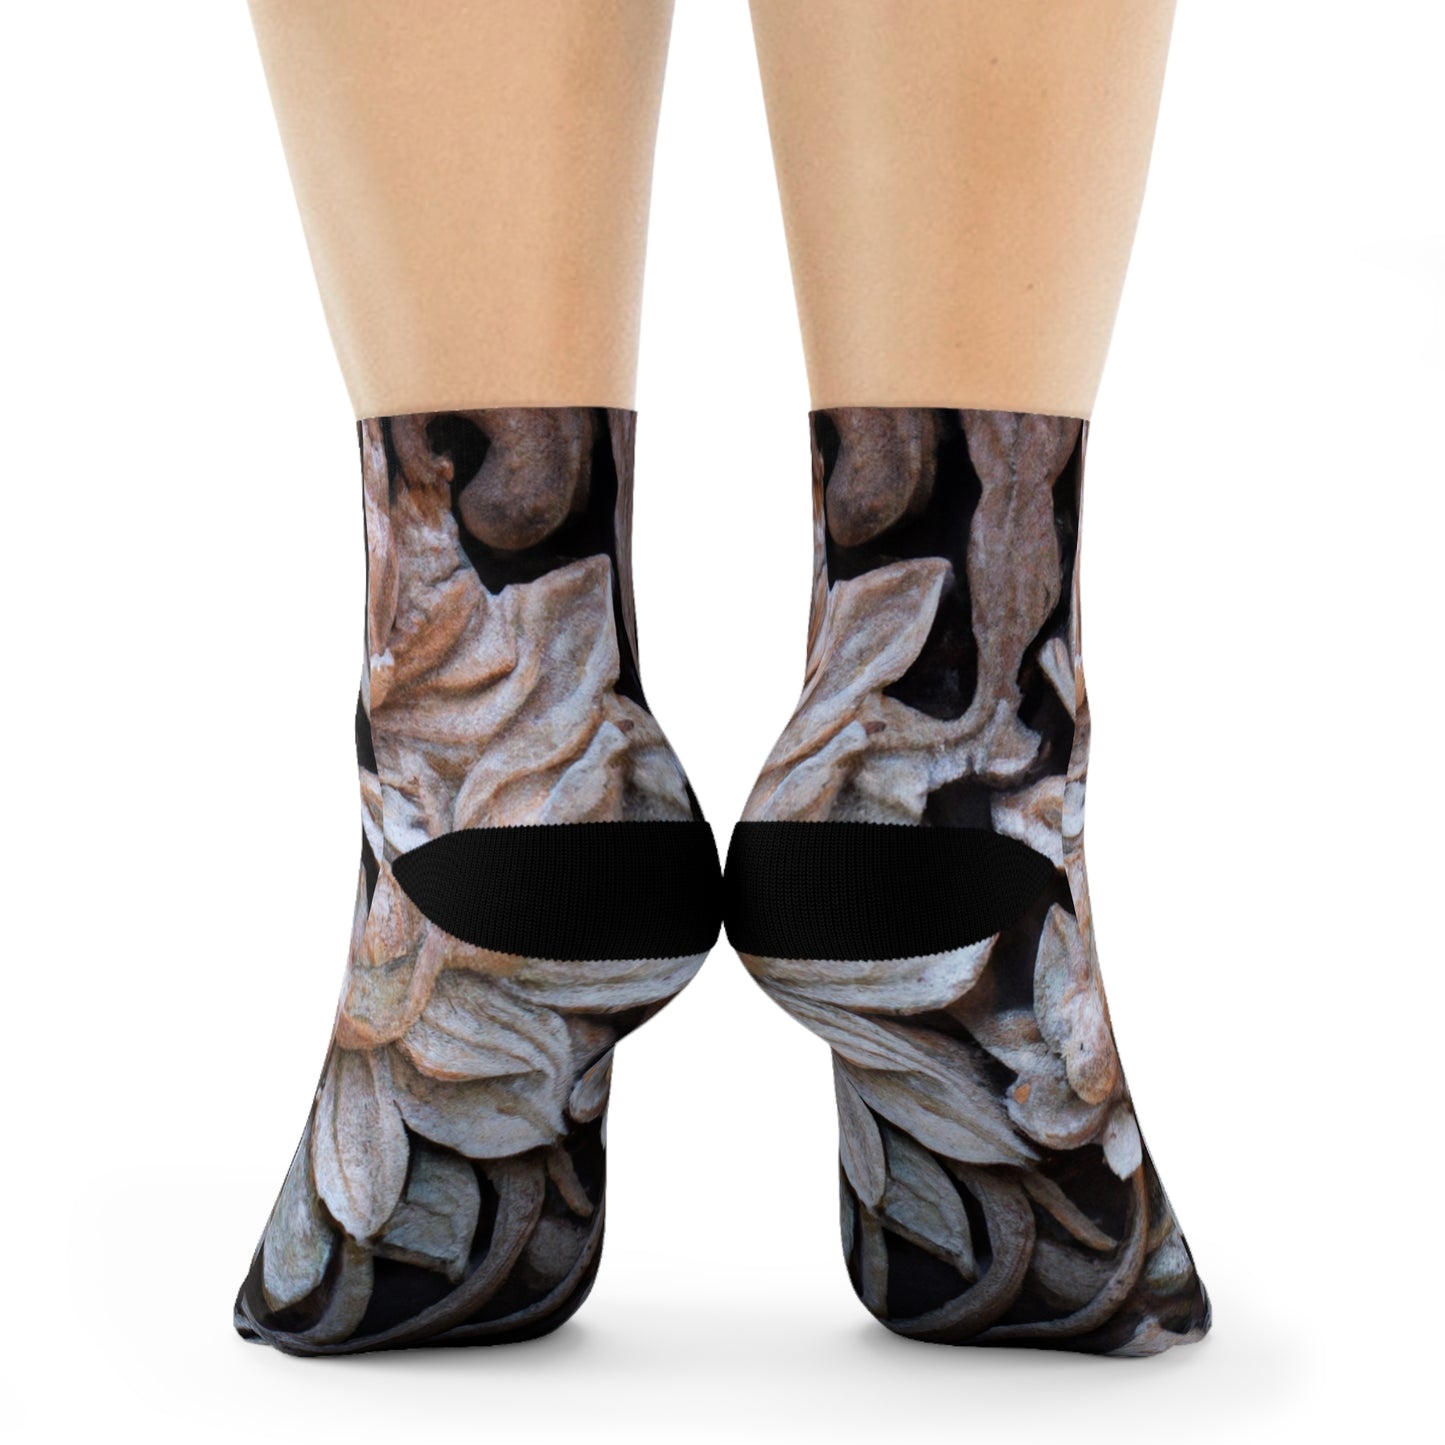 "Temple Treasures: Lotus Blossom Crew Socks with Balinese Stone Carving Print" - Men and Women Crew Socks Combed Athletic Sports Casual Classic